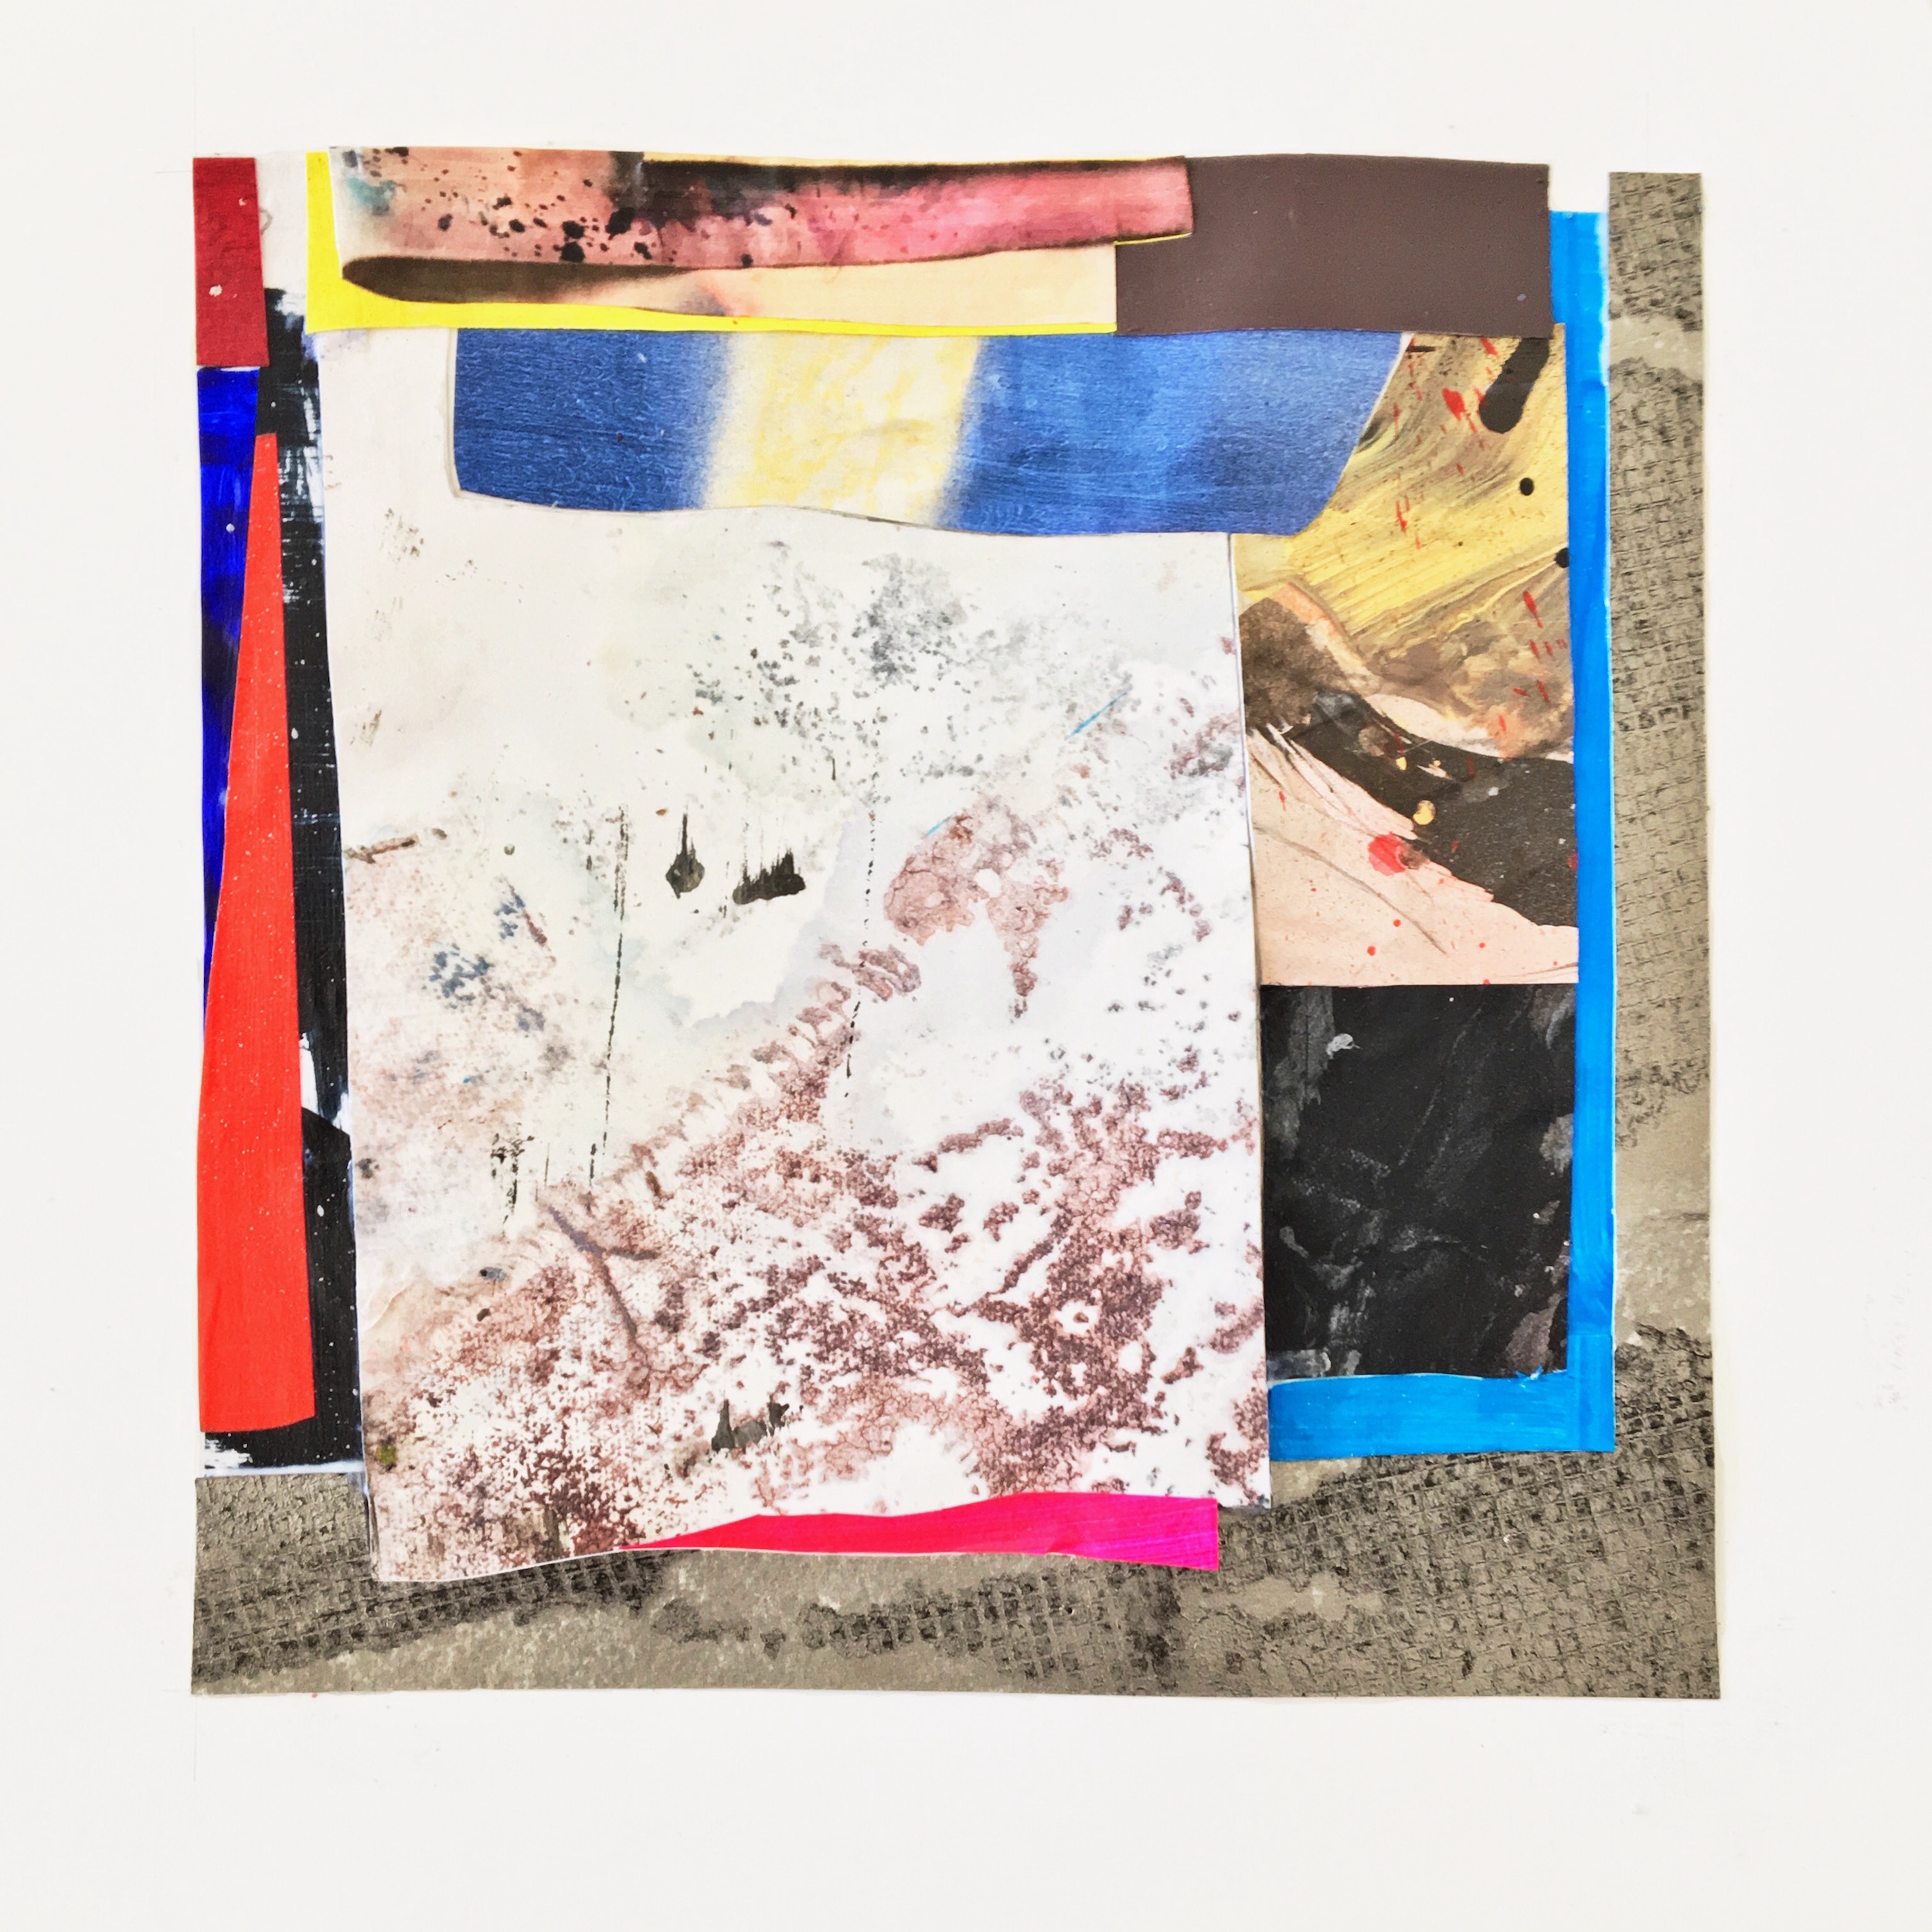  IAIN MUIRHEAD   18136:18160,   2018. Peripheral painting aggregate (2014-2018) collage on paper. 8 x 8 inches each. 